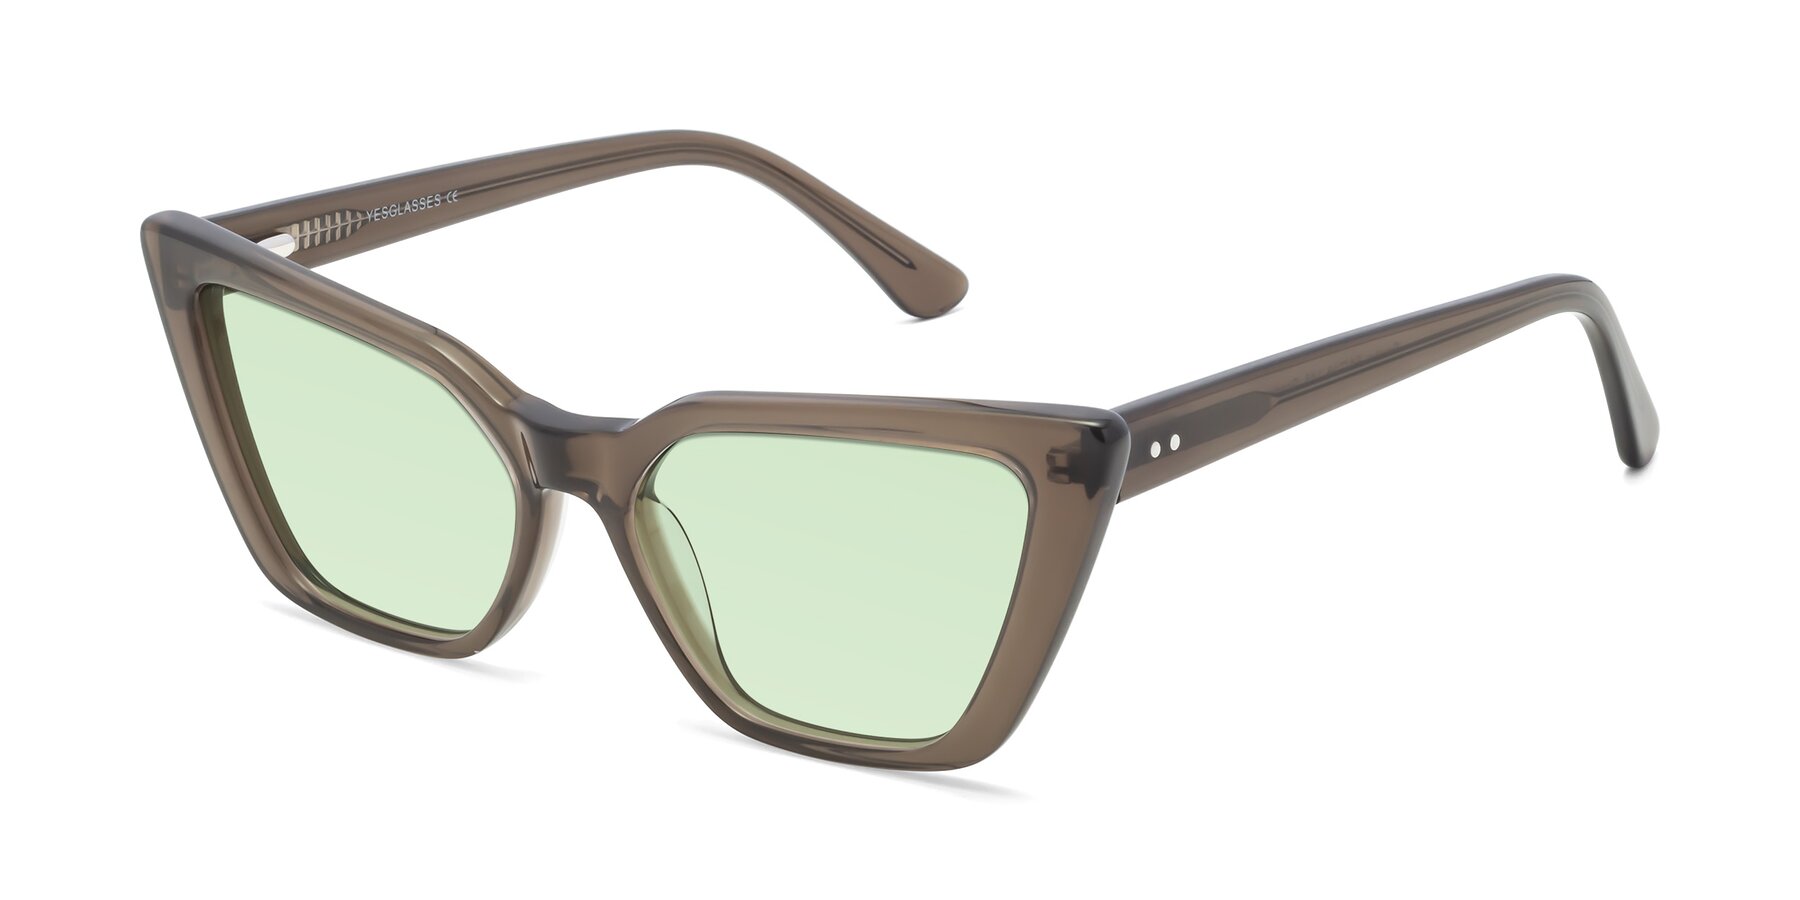 Angle of Bowtie in Gradient Green with Light Green Tinted Lenses